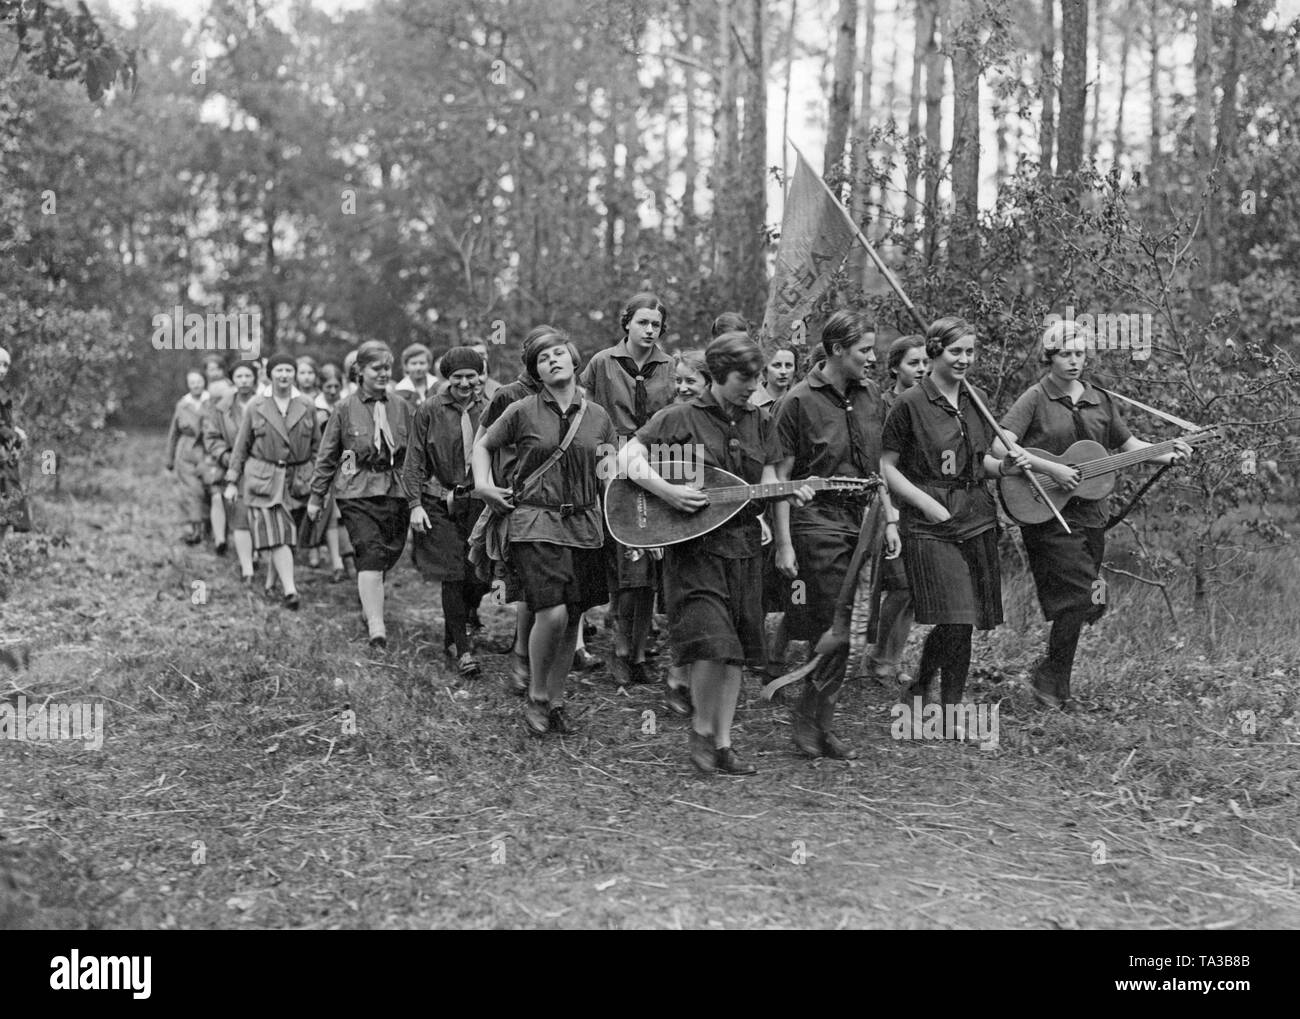 March of the 'Deutsche Jungmaedchendienst' to a medical practice. Stock Photo